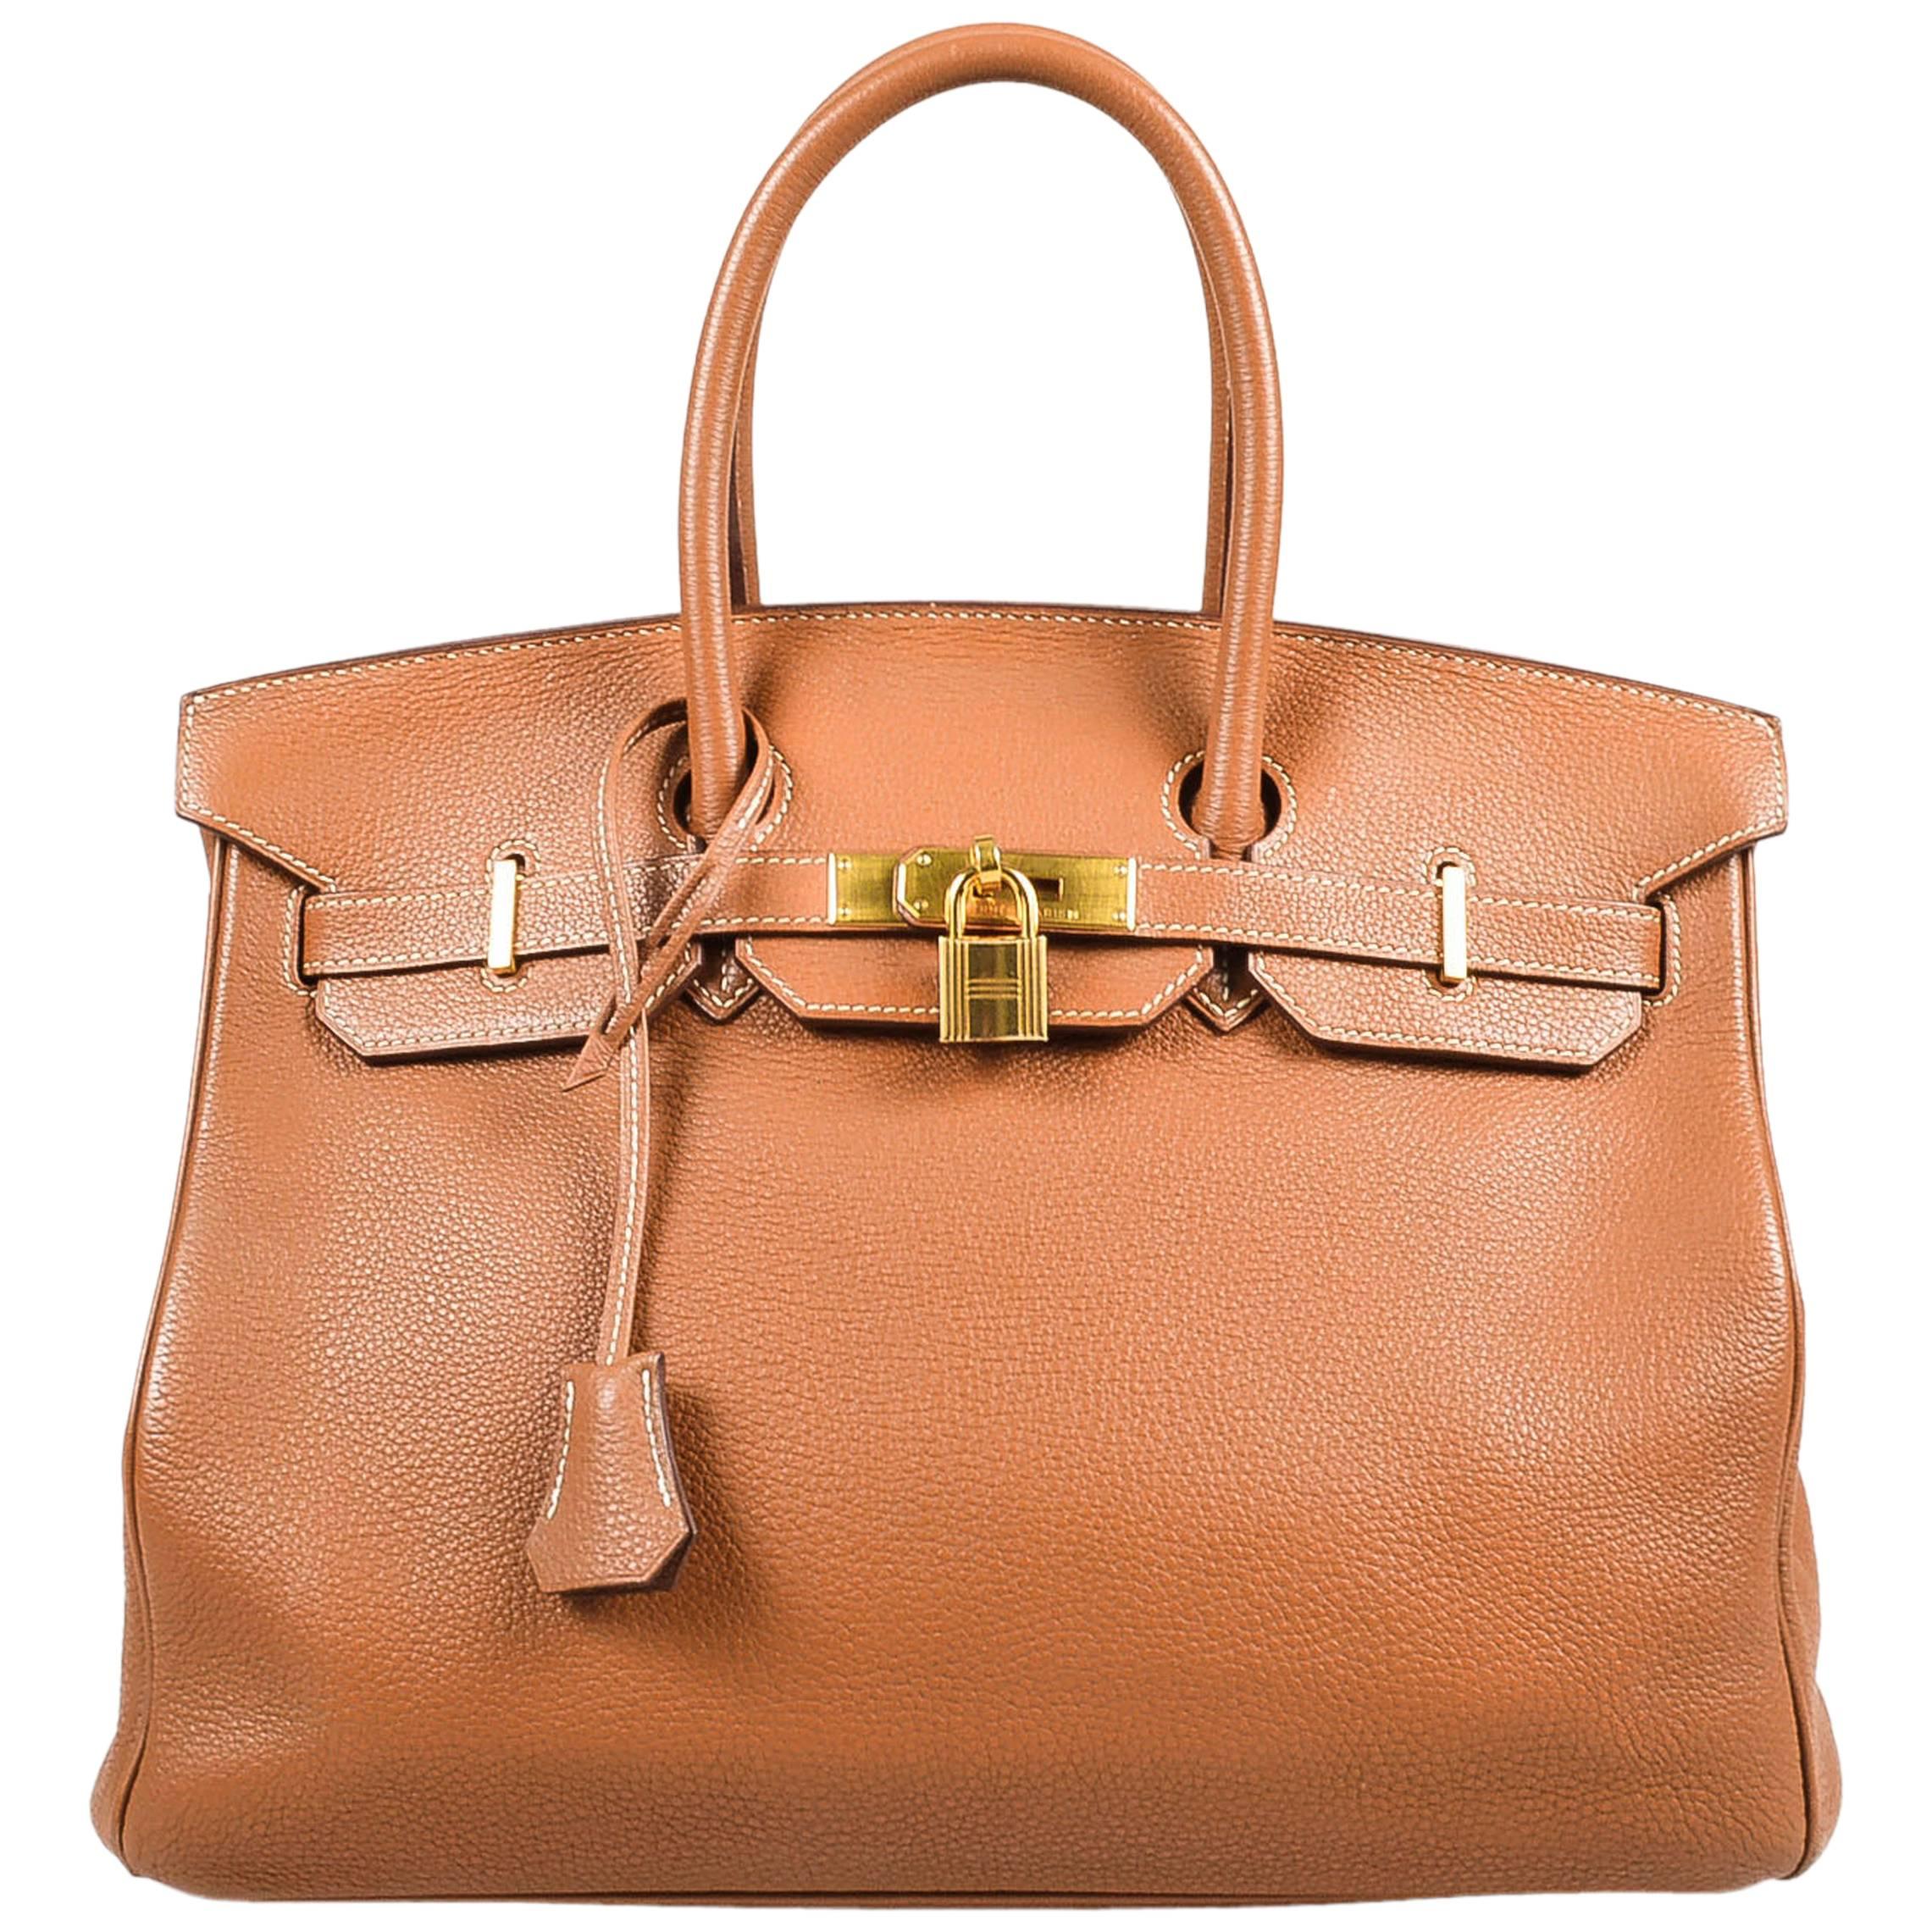 Hermes Gold Brown Clemence Leather Top Handle "Birkin 35" Tote Bag For Sale